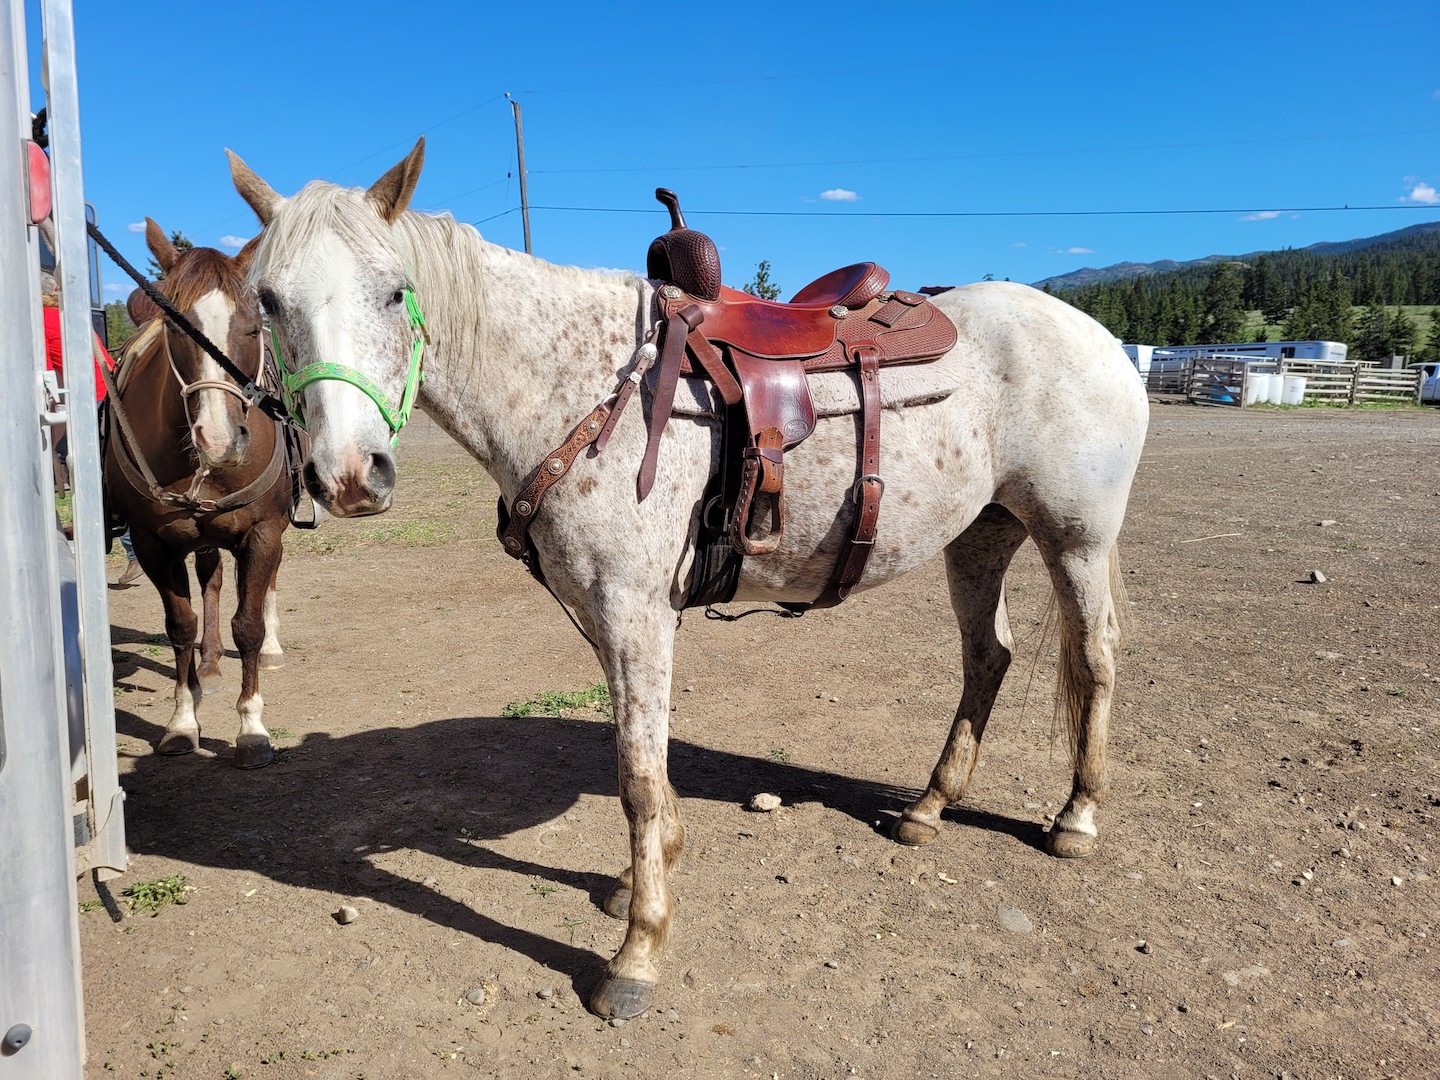 appaloosa mare tied to a trailer, wearing a fancy western saddle with another horse tied up in the background